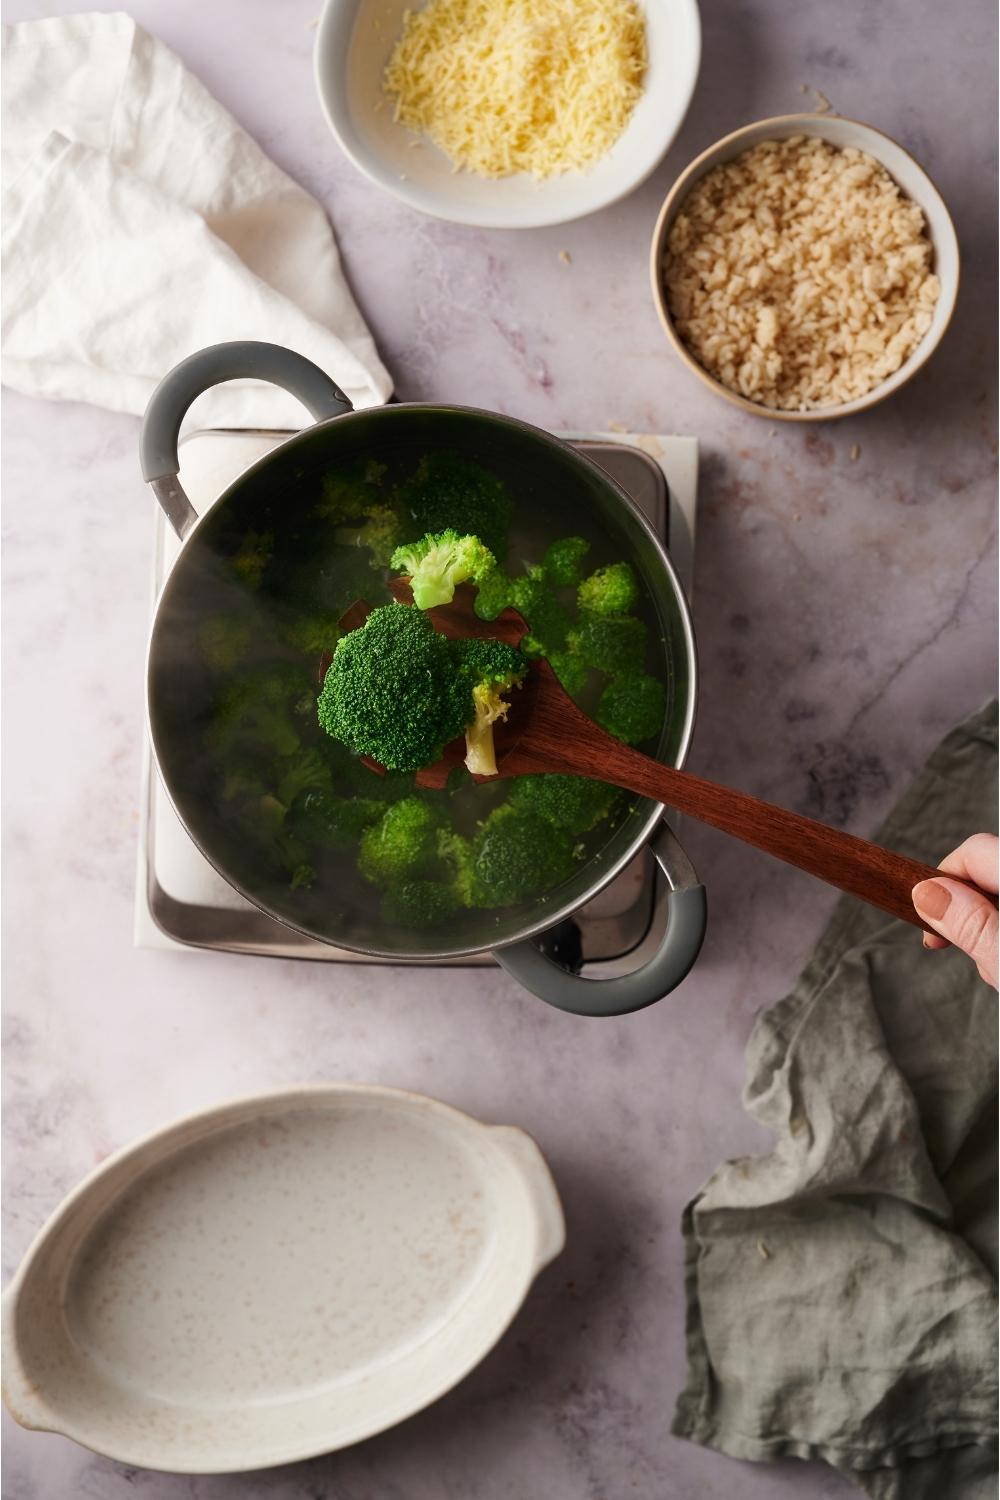 Pot of broccoli freshly steamed with a person removing the cooked broccoli from the pot with a wooden spoon.